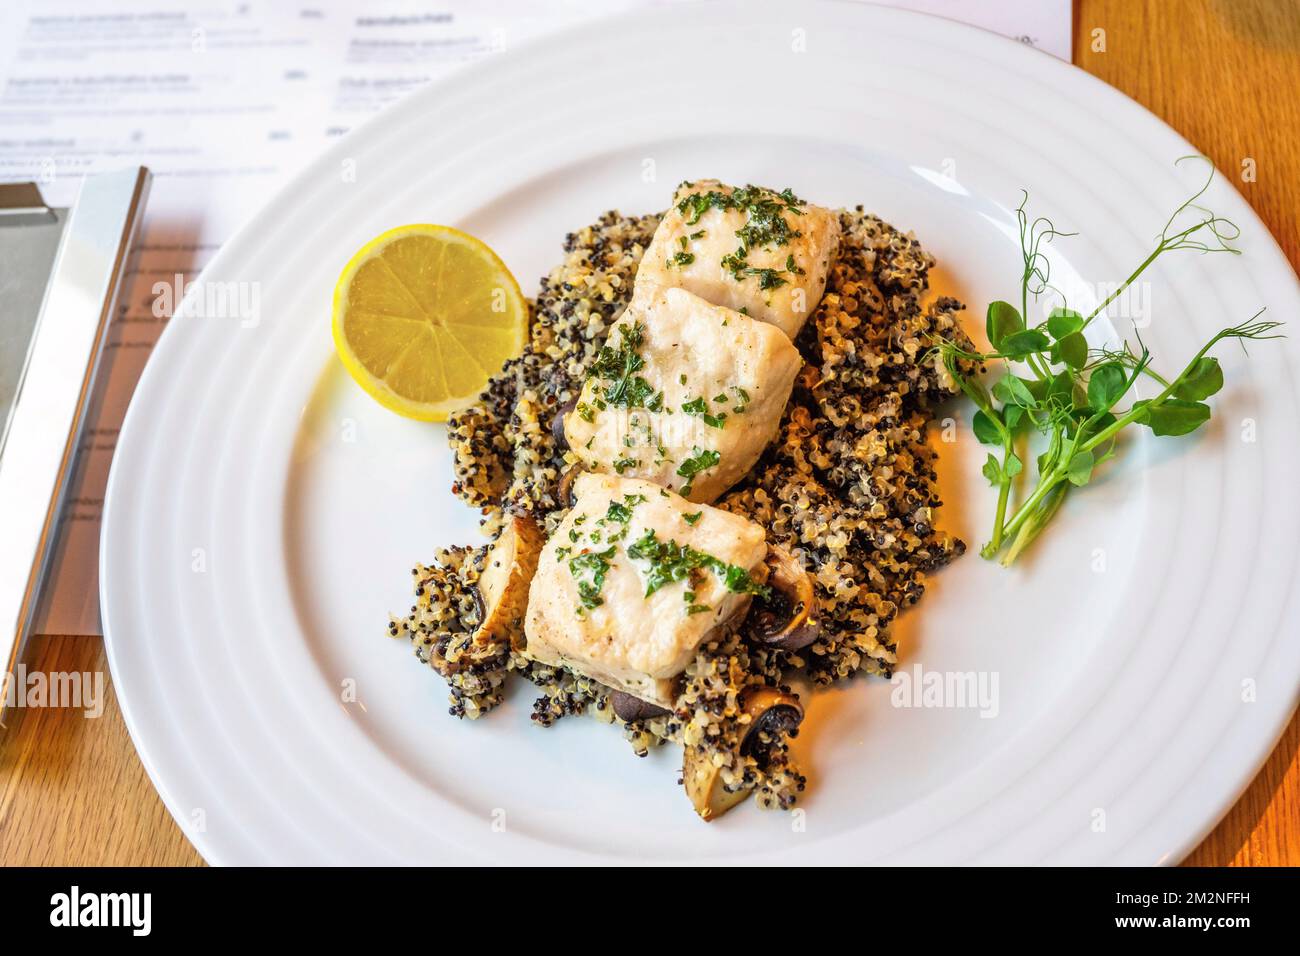 Baked sturgeon piece on quinoa with champignon mushroom, pea sprout and lemon on white plate, closeup. Dinner in restaurant. Stock Photo